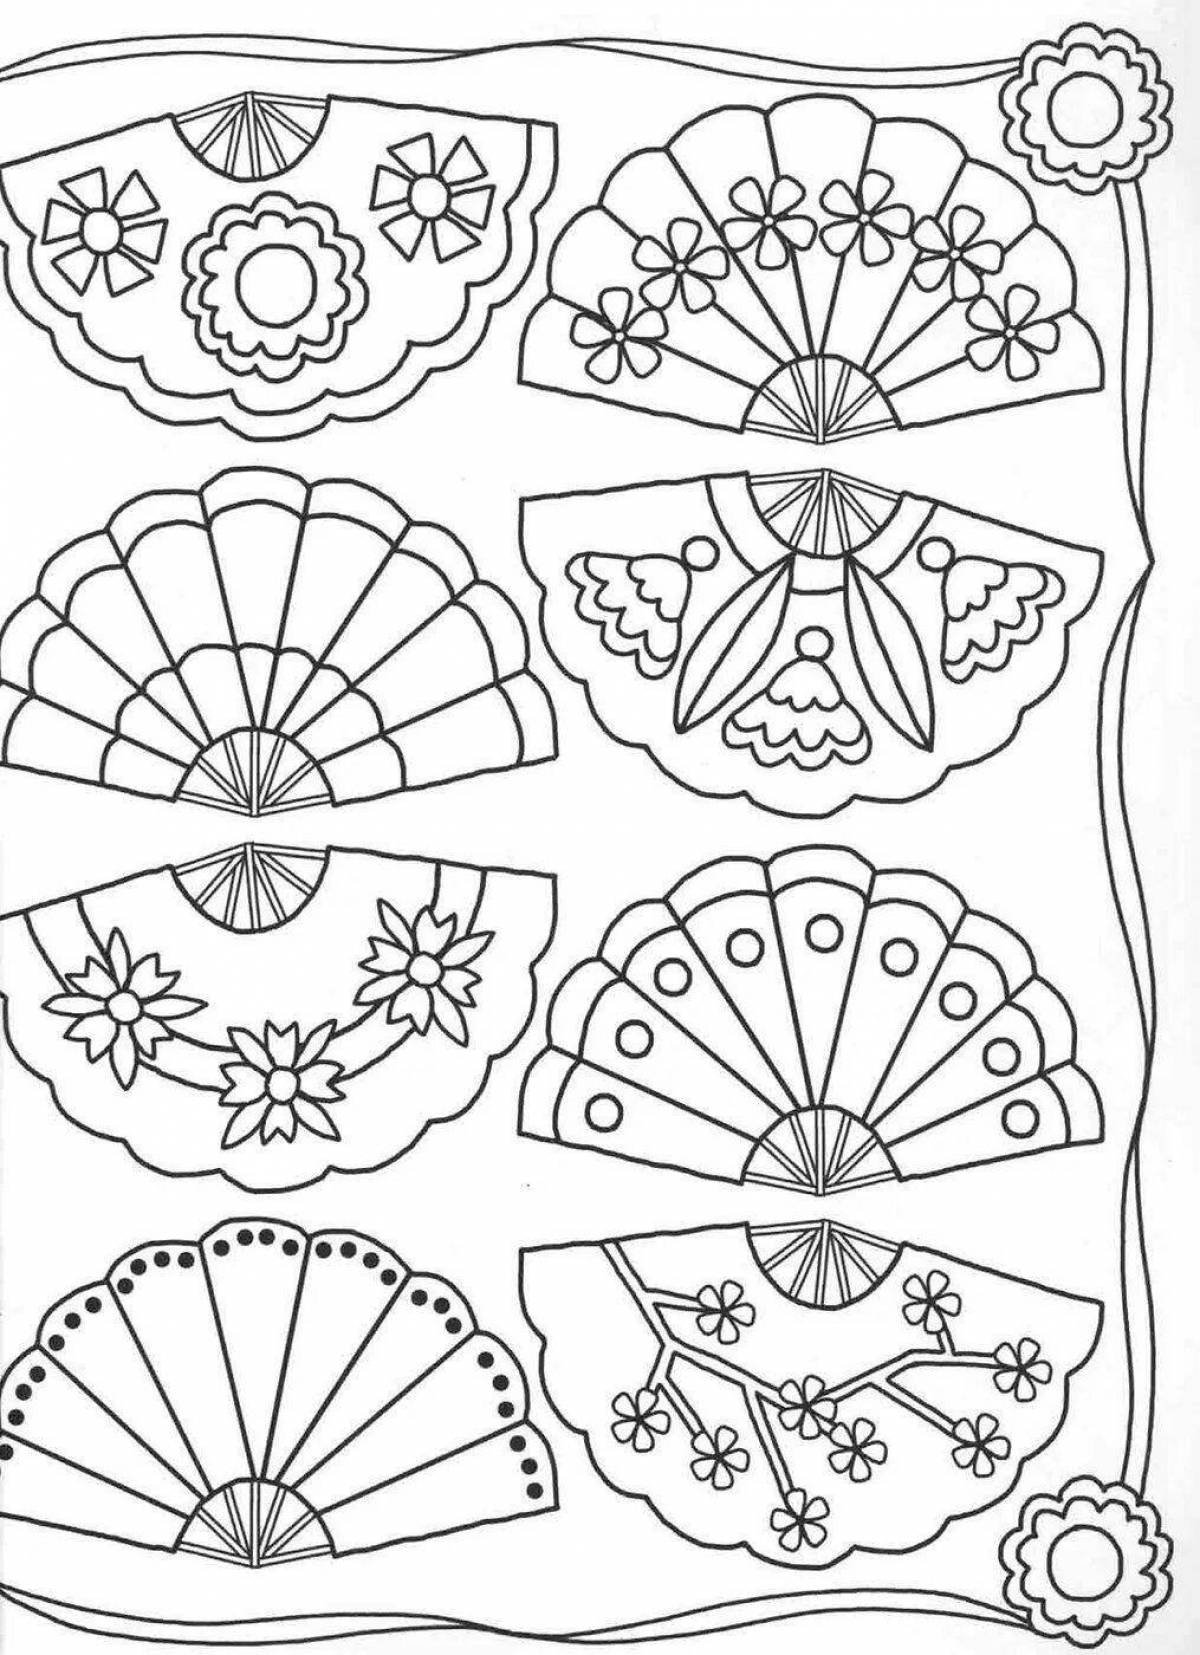 Complex Chinese coloring fan